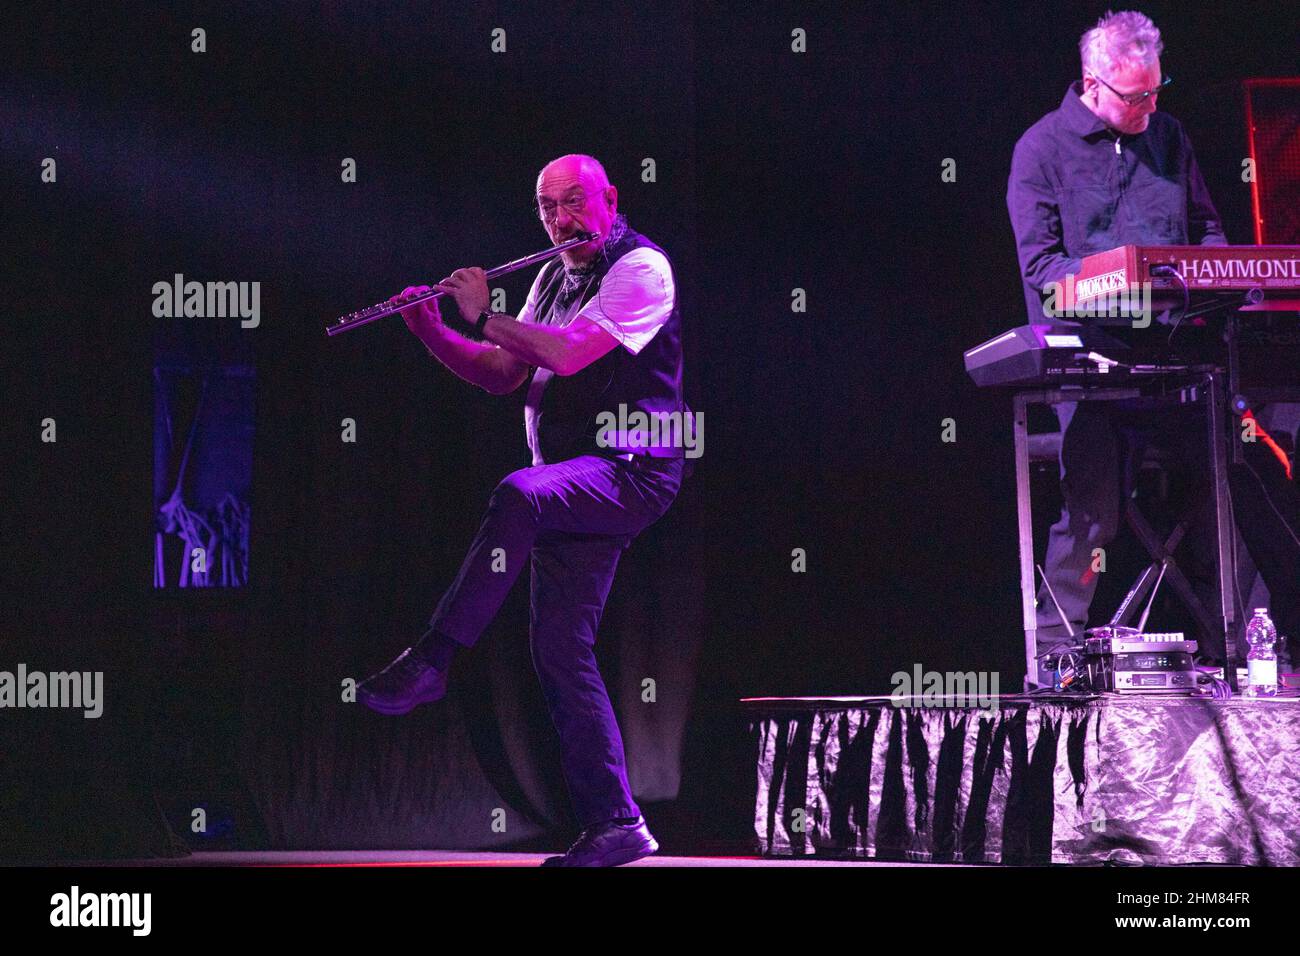 Gran Teatro Geox, Padova, Italy, February 06, 2022, Ian Anderson during  2022 JETHRO TULL tour The Prog Years - Music Concert Stock Photo - Alamy